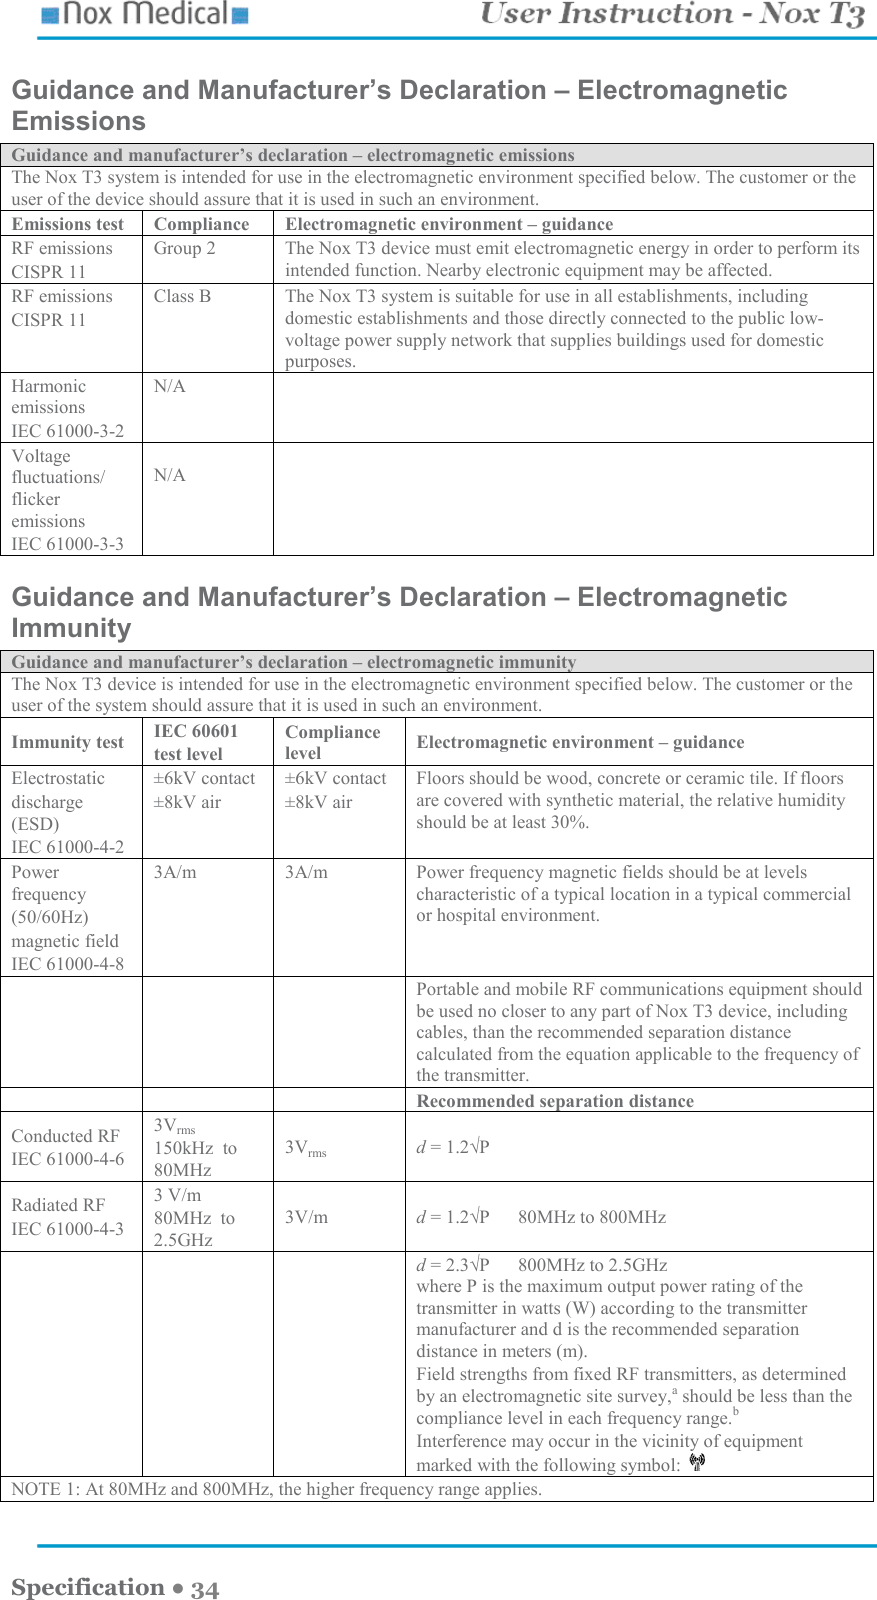    Specification ● 34 Guidance and Manufacturer’s Declaration – Electromagnetic Emissions Guidance and manufacturer’s declaration – electromagnetic emissions The Nox T3 system is intended for use in the electromagnetic environment specified below. The customer or the user of the device should assure that it is used in such an environment. Emissions test  Compliance  Electromagnetic environment – guidance RF emissions CISPR 11 Group 2  The Nox T3 device must emit electromagnetic energy in order to perform its intended function. Nearby electronic equipment may be affected. RF emissions CISPR 11 Class B  The Nox T3 system is suitable for use in all establishments, including domestic establishments and those directly connected to the public low-voltage power supply network that supplies buildings used for domestic purposes. Harmonic emissions IEC 61000-3-2 N/A   Voltage fluctuations/ flicker emissions IEC 61000-3-3  N/A   Guidance and Manufacturer’s Declaration – Electromagnetic Immunity Guidance and manufacturer’s declaration – electromagnetic immunity The Nox T3 device is intended for use in the electromagnetic environment specified below. The customer or the user of the system should assure that it is used in such an environment. Immunity test  IEC 60601 test level Compliance level  Electromagnetic environment – guidance Electrostatic discharge (ESD) IEC 61000-4-2 ±6kV contact ±8kV air ±6kV contact ±8kV air Floors should be wood, concrete or ceramic tile. If floors are covered with synthetic material, the relative humidity should be at least 30%. Power frequency (50/60Hz) magnetic field IEC 61000-4-8 3A/m  3A/m  Power frequency magnetic fields should be at levels characteristic of a typical location in a typical commercial or hospital environment.    Portable and mobile RF communications equipment should be used no closer to any part of Nox T3 device, including cables, than the recommended separation distance calculated from the equation applicable to the frequency of the transmitter.       Recommended separation distance Conducted RF IEC 61000-4-6 3Vrms 150kHz  to 80MHz 3Vrms d = 1.2√P Radiated RF IEC 61000-4-3 3 V/m 80MHz  to 2.5GHz 3V/m  d = 1.2√P      80MHz to 800MHz       d = 2.3√P      800MHz to 2.5GHz where P is the maximum output power rating of the transmitter in watts (W) according to the transmitter manufacturer and d is the recommended separation distance in meters (m). Field strengths from fixed RF transmitters, as determined by an electromagnetic site survey,a should be less than the compliance level in each frequency range.b Interference may occur in the vicinity of equipment marked with the following symbol:   NOTE 1: At 80MHz and 800MHz, the higher frequency range applies. 